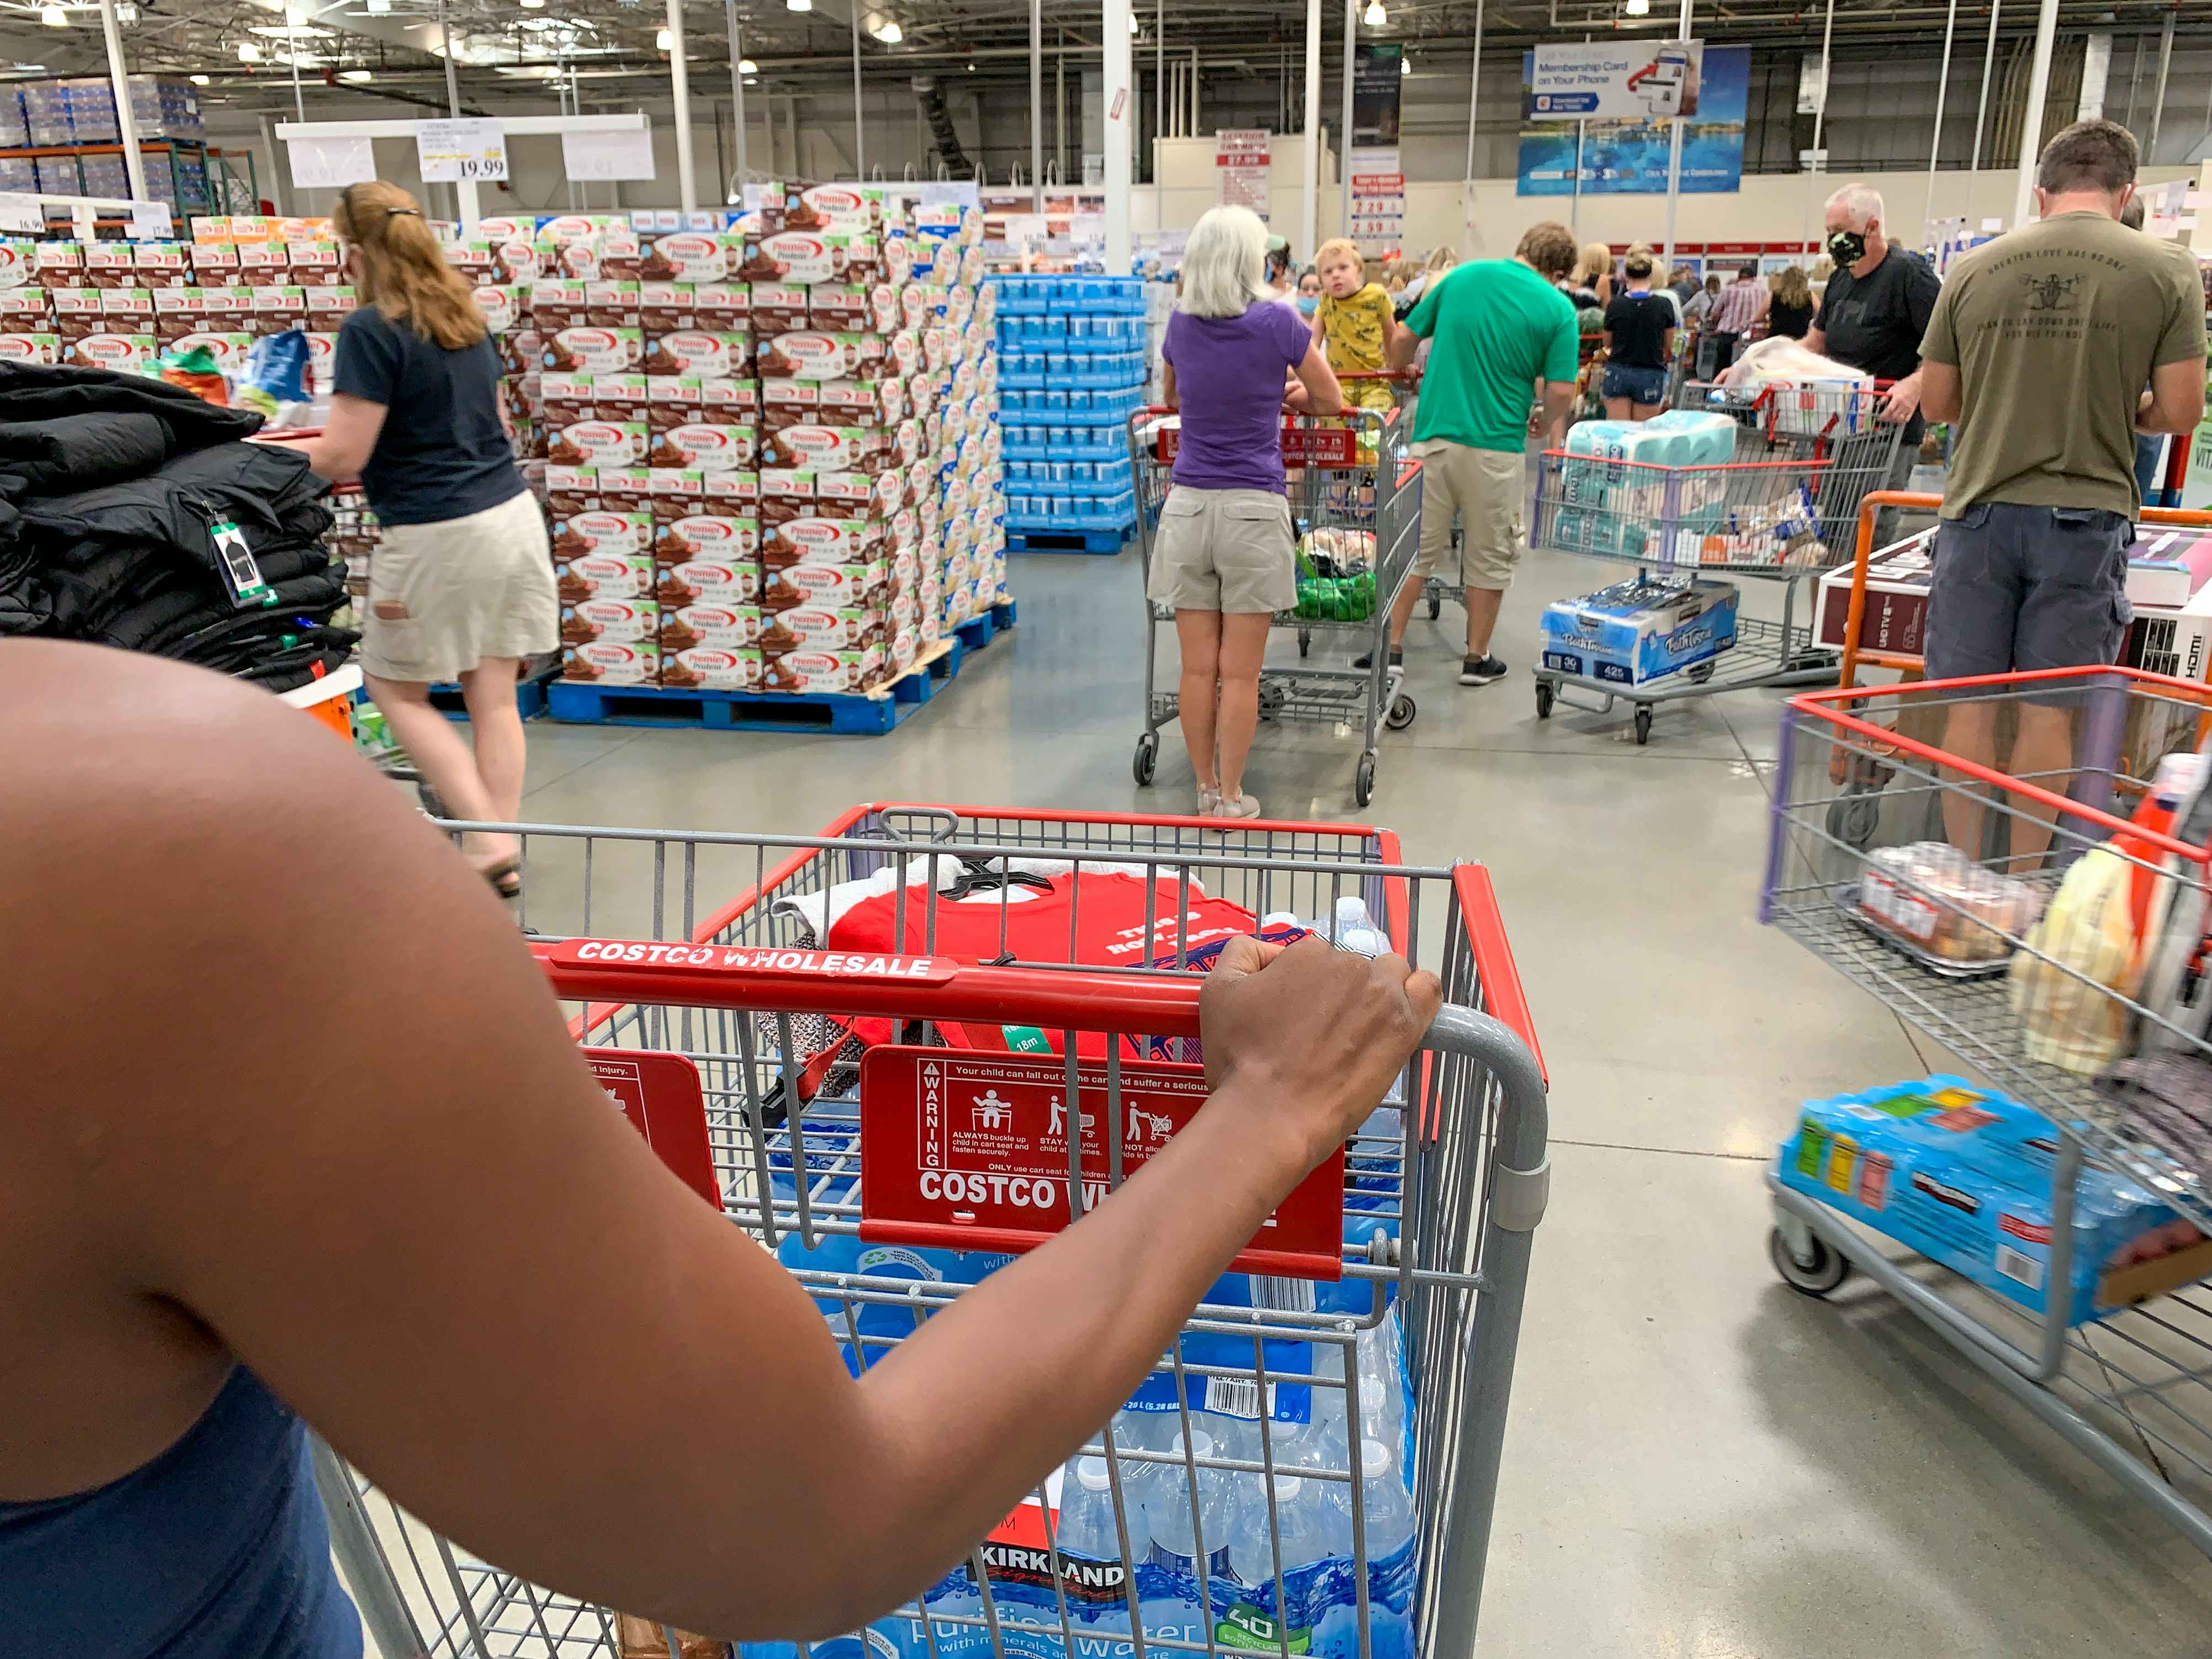 A woman from behind, pushing a Costco shopping cart through a crowd of other shoppers also pushing carts. Costco isn't a store open on 4th of July.